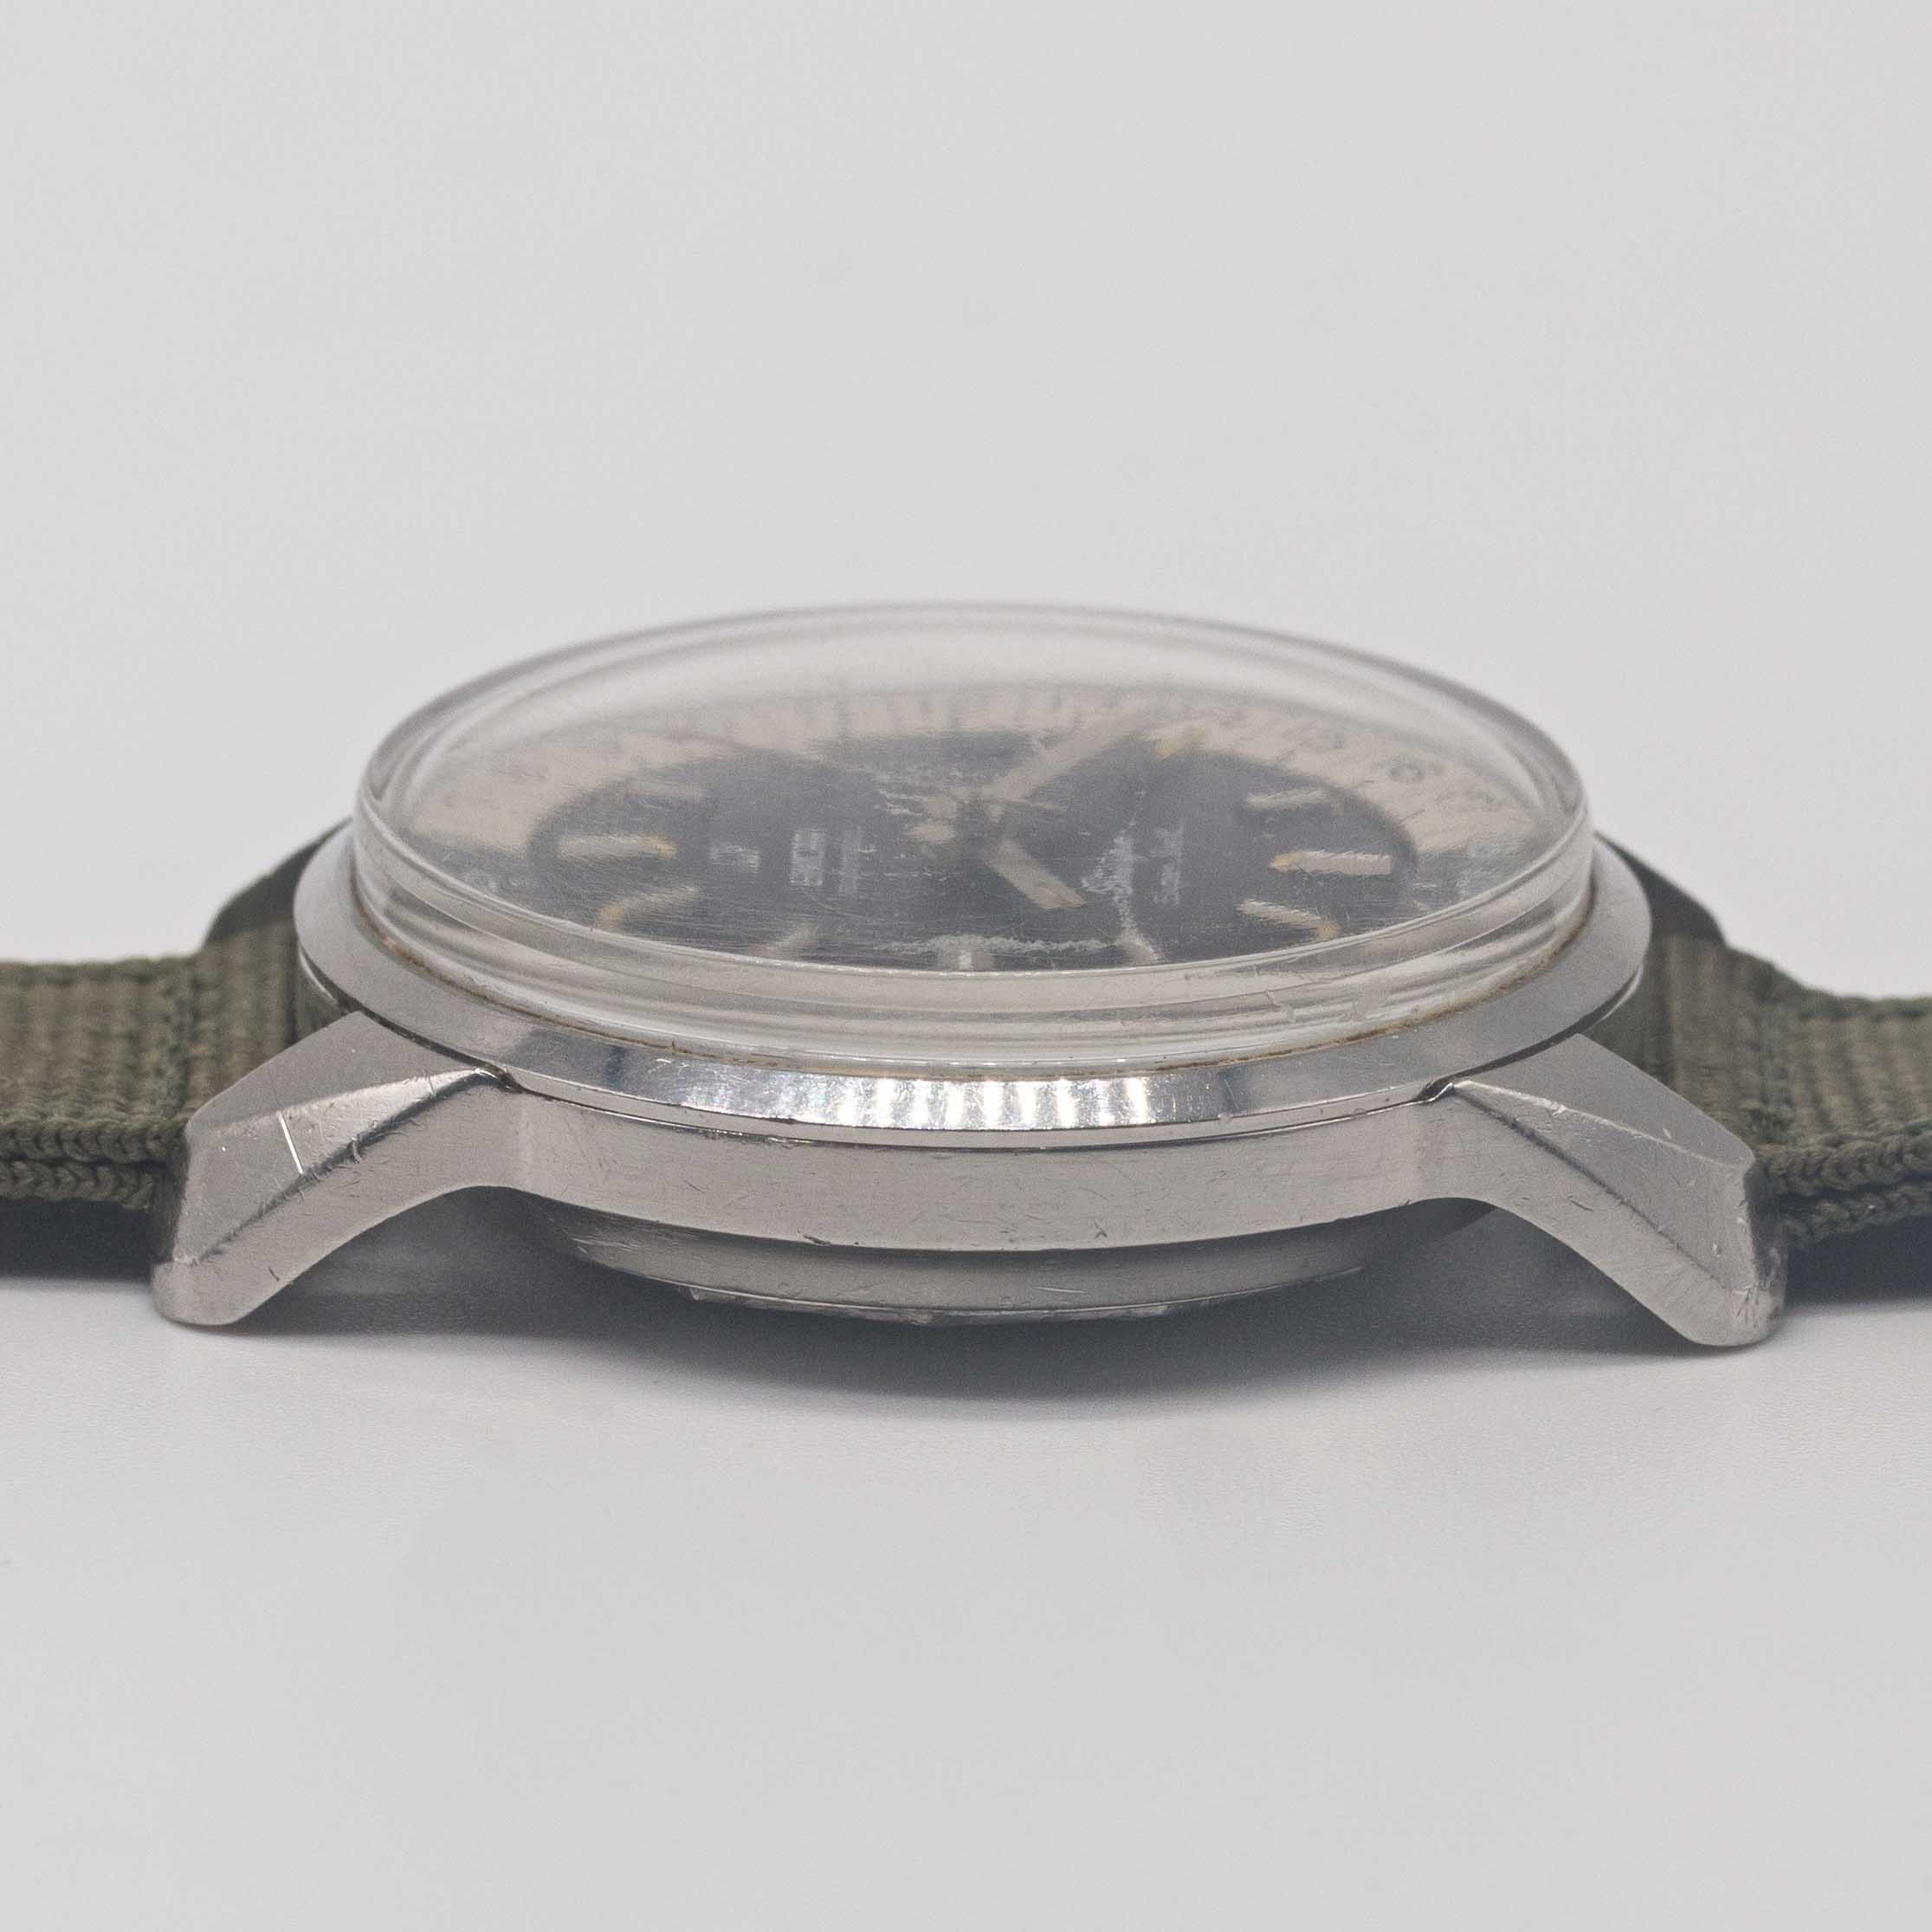 A GENTLEMAN'S STAINLESS STEEL ENICAR SHERPA SUPER JET GMT WRIST WATCH CIRCA 1960s, REF. 146/003 WITH - Image 8 of 8